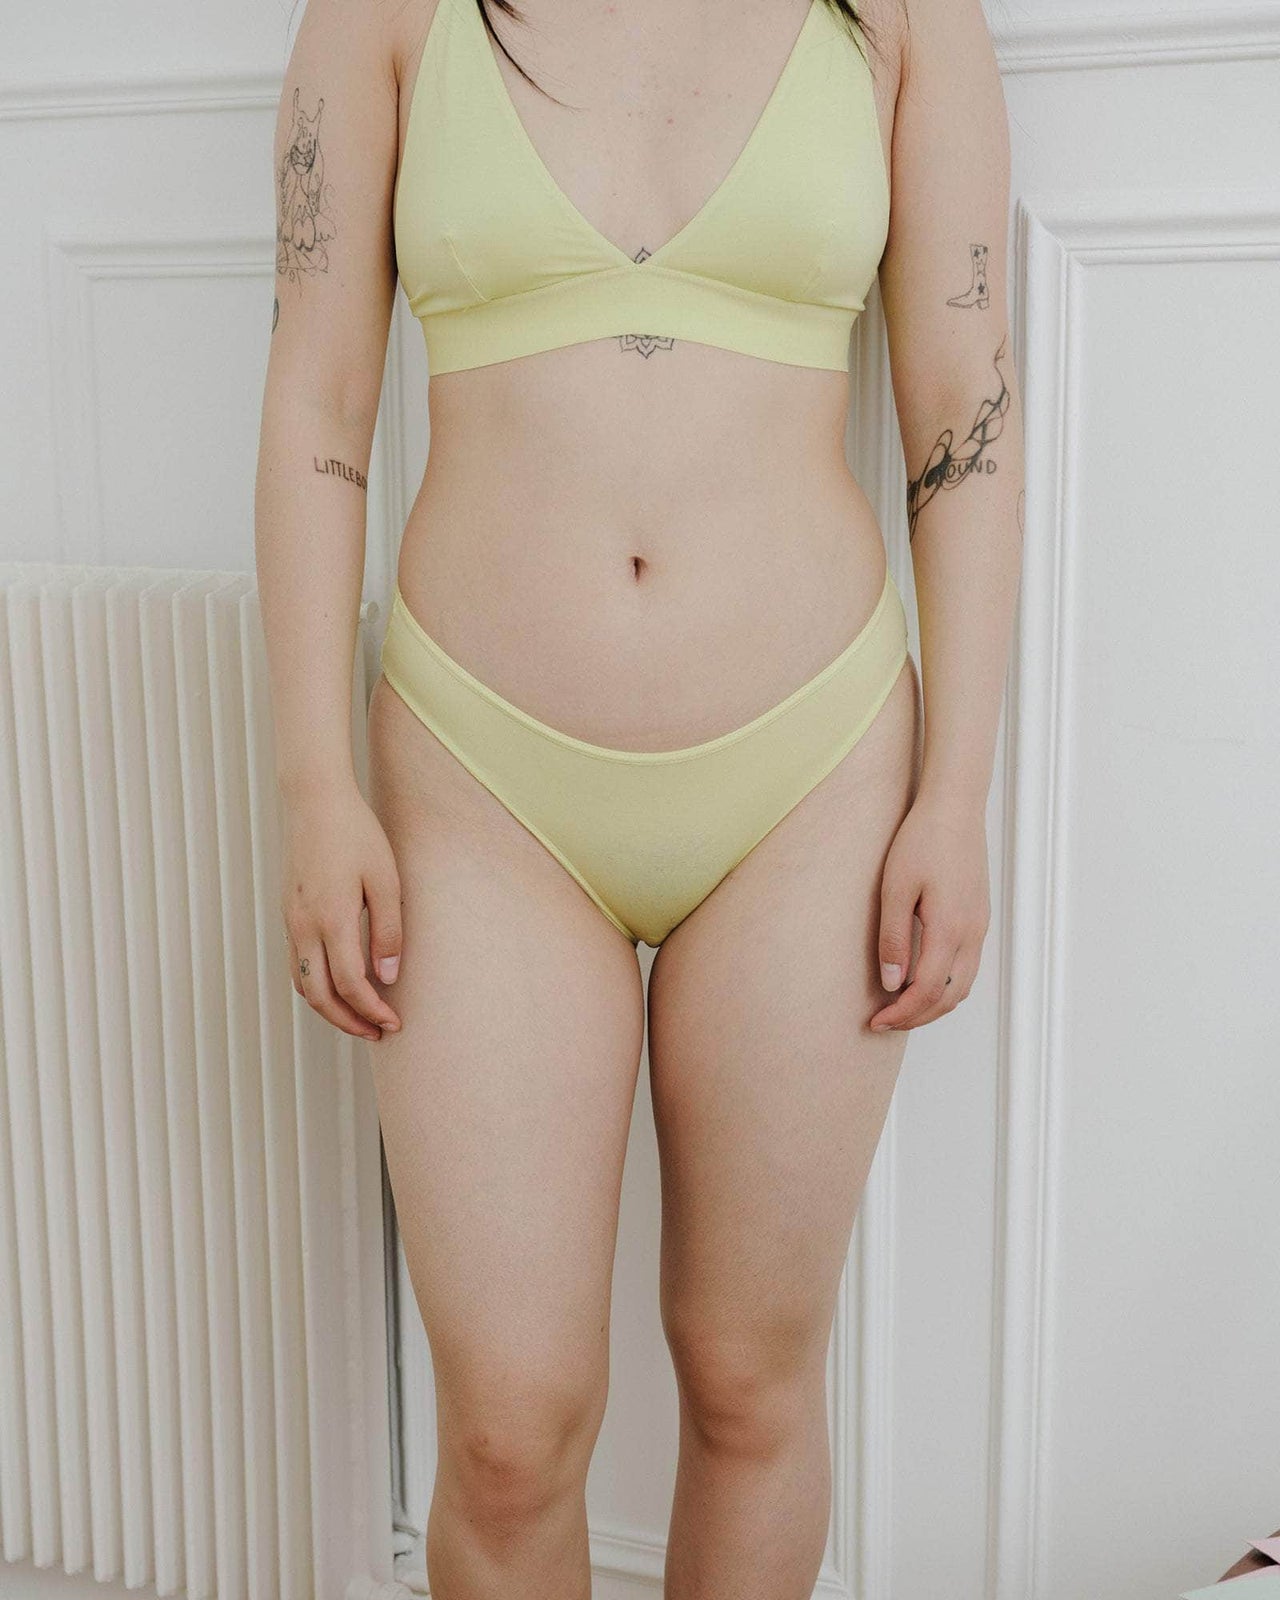 Bamboo Underwear, Basics in Natural and Recycled Fibers